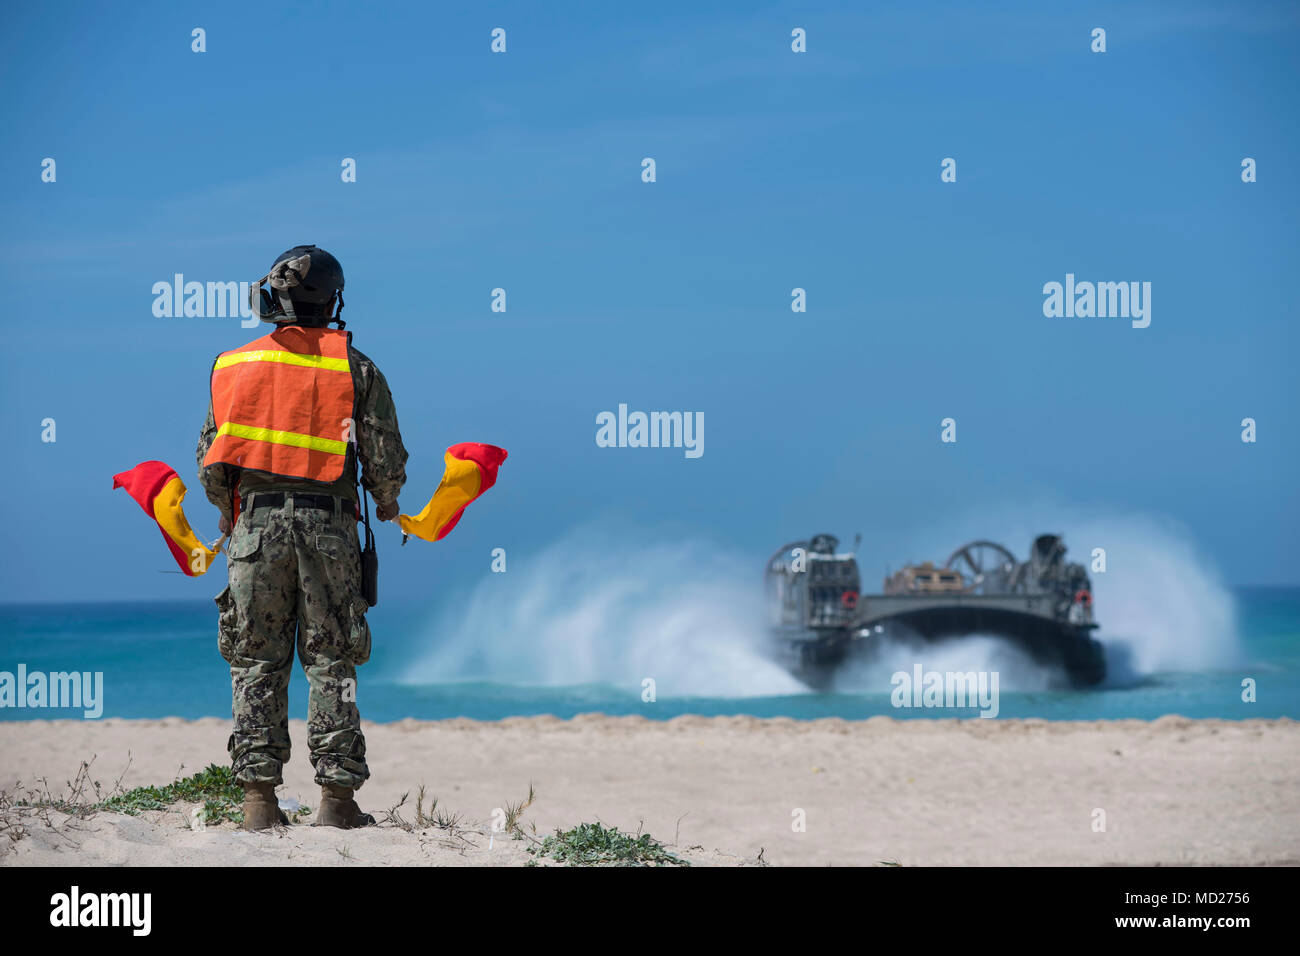 180307-N-TK177-0291 HAIFA, ISRAEL (March 7, 2018) Logistics Specialist Seaman Denny Figueroa, from Bayamon, Puerto Rico, and assigned to Beach Master Unit (BMU) 2, signals Landing Craft, Air Cushion 67, attached to Assault Craft Unit (ACU) 4, as it prepares to make landfall on the beach in Israel, March 7, 2018. The Wasp-class amphibious assault ship USS Iwo Jima (LHD 7), homeported in Mayport, Florida, is participating in Juniper Cobra 2018 and conducting naval operations in the U.S 6th Fleet area of operations. JC18 is a computer-assisted exercise conducted through computer simulations focus Stock Photo